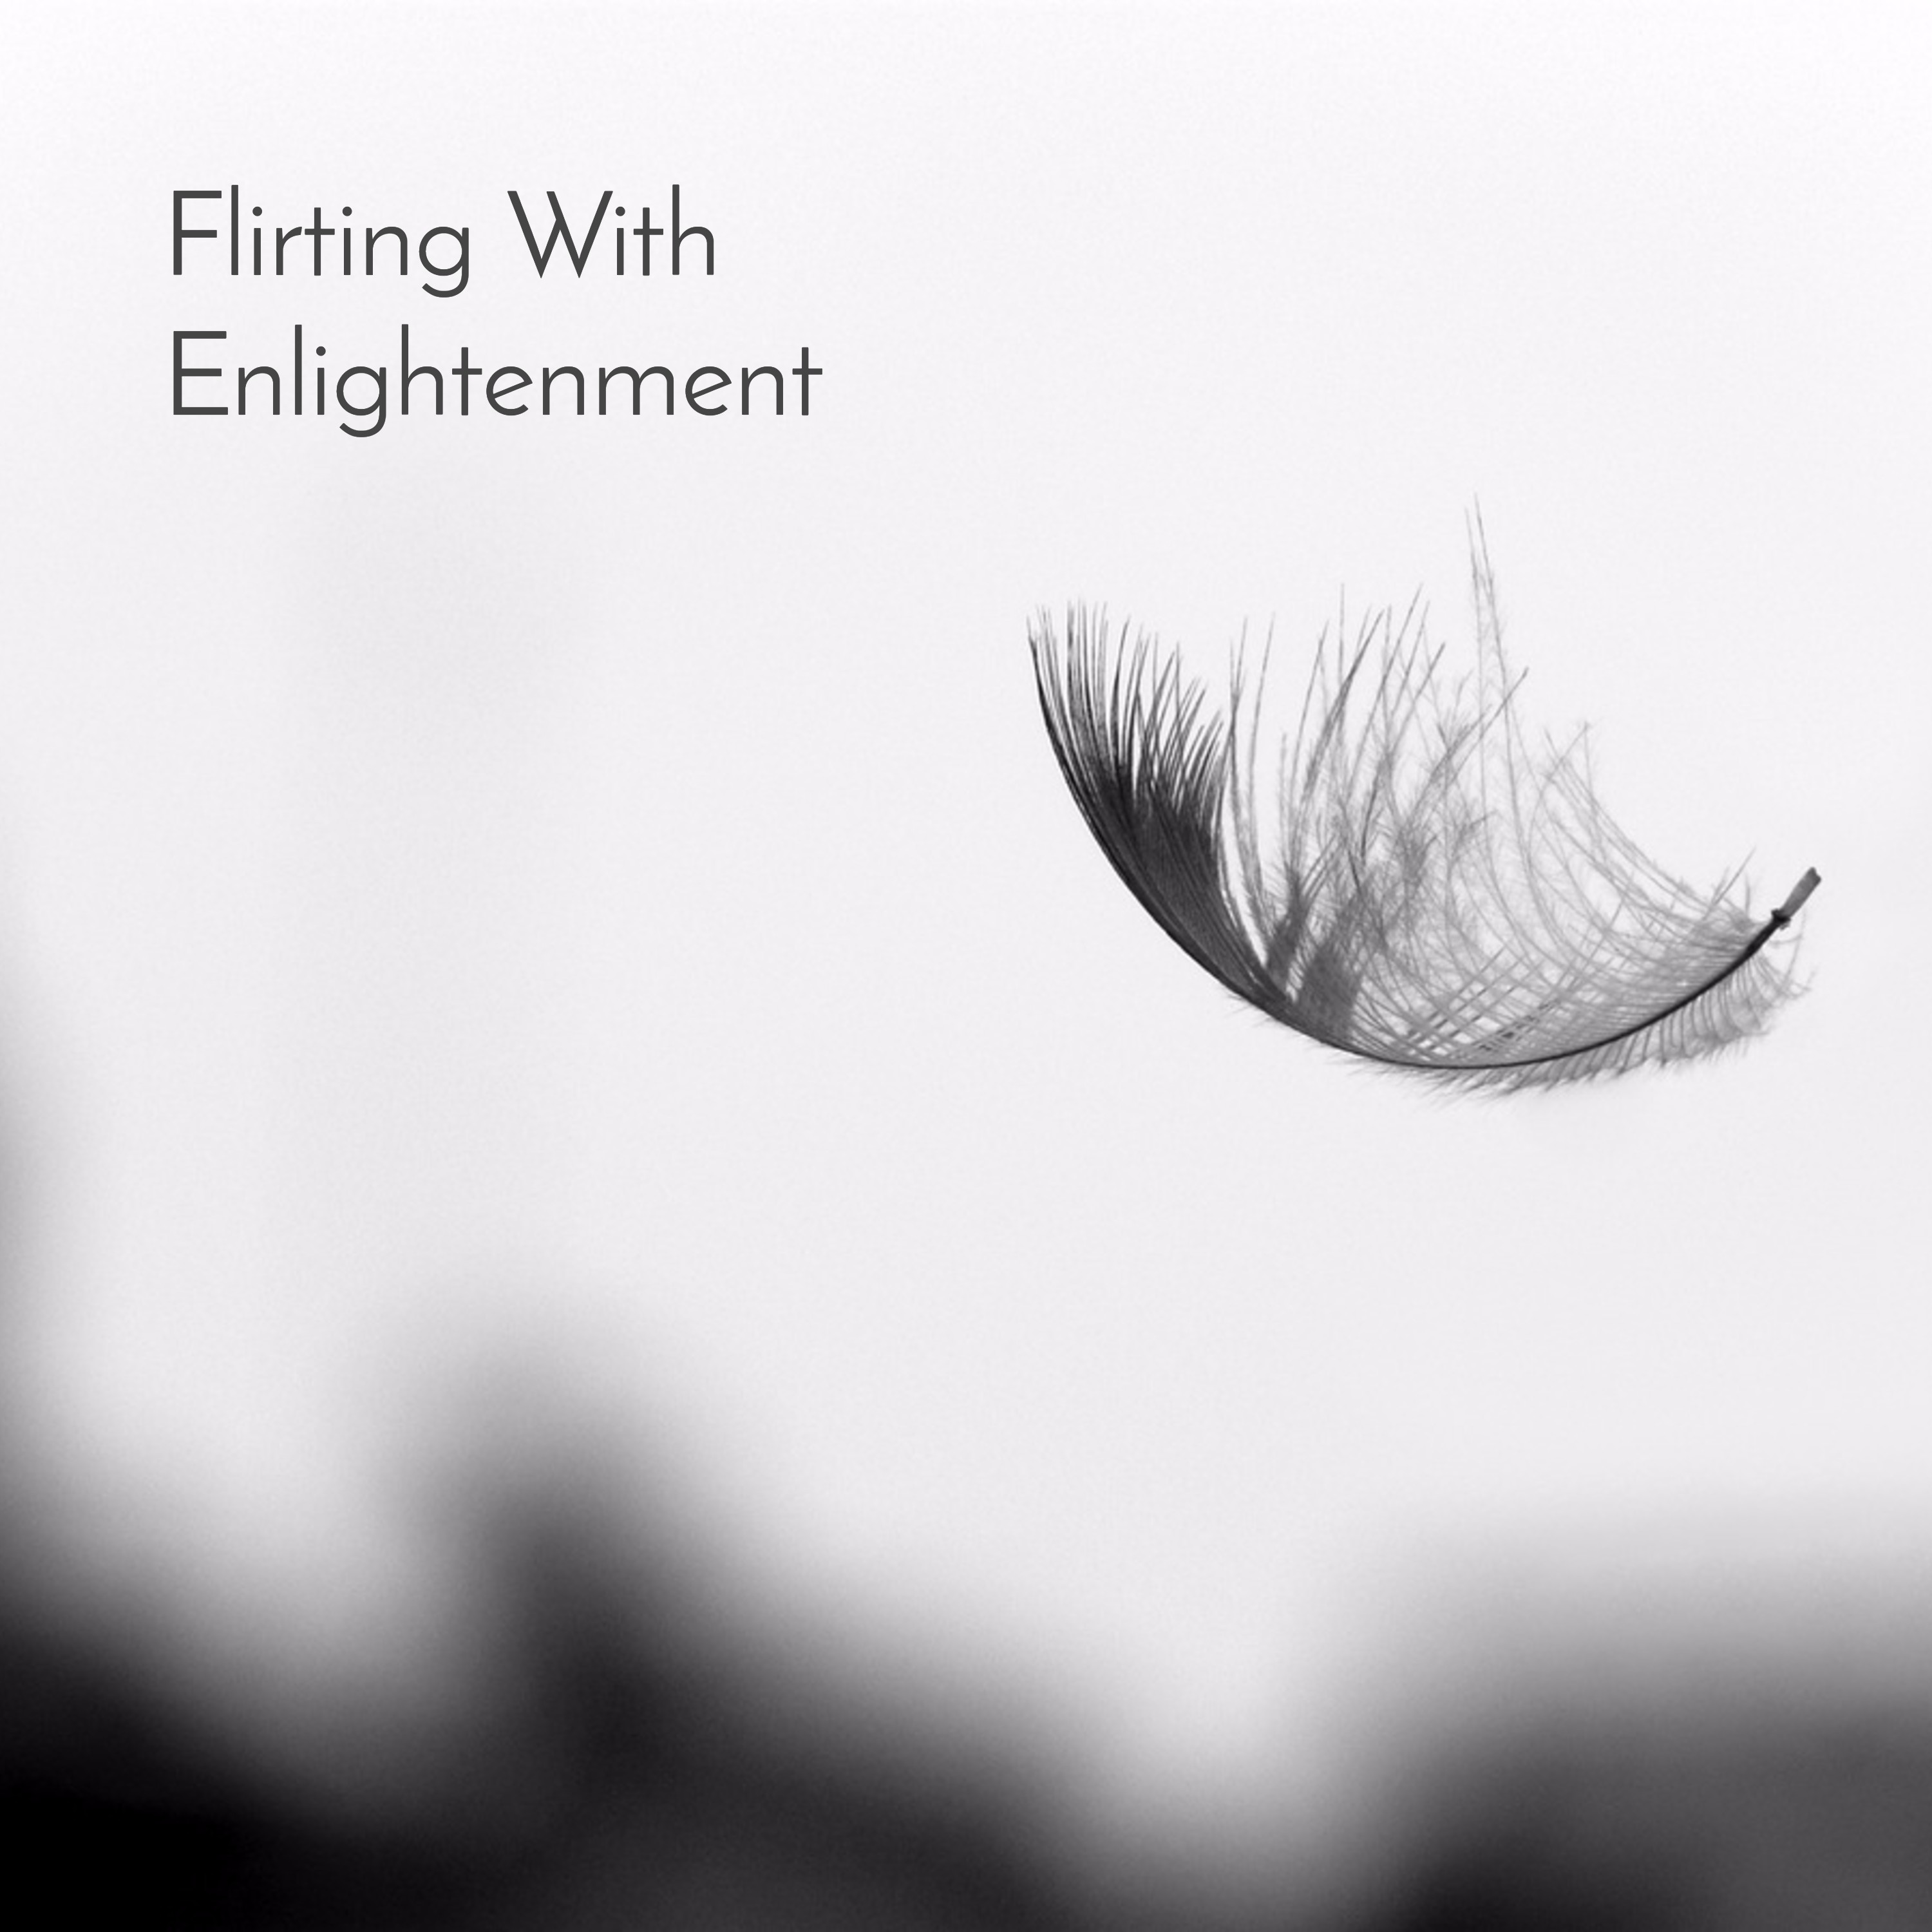 Flirting with Enlightenment